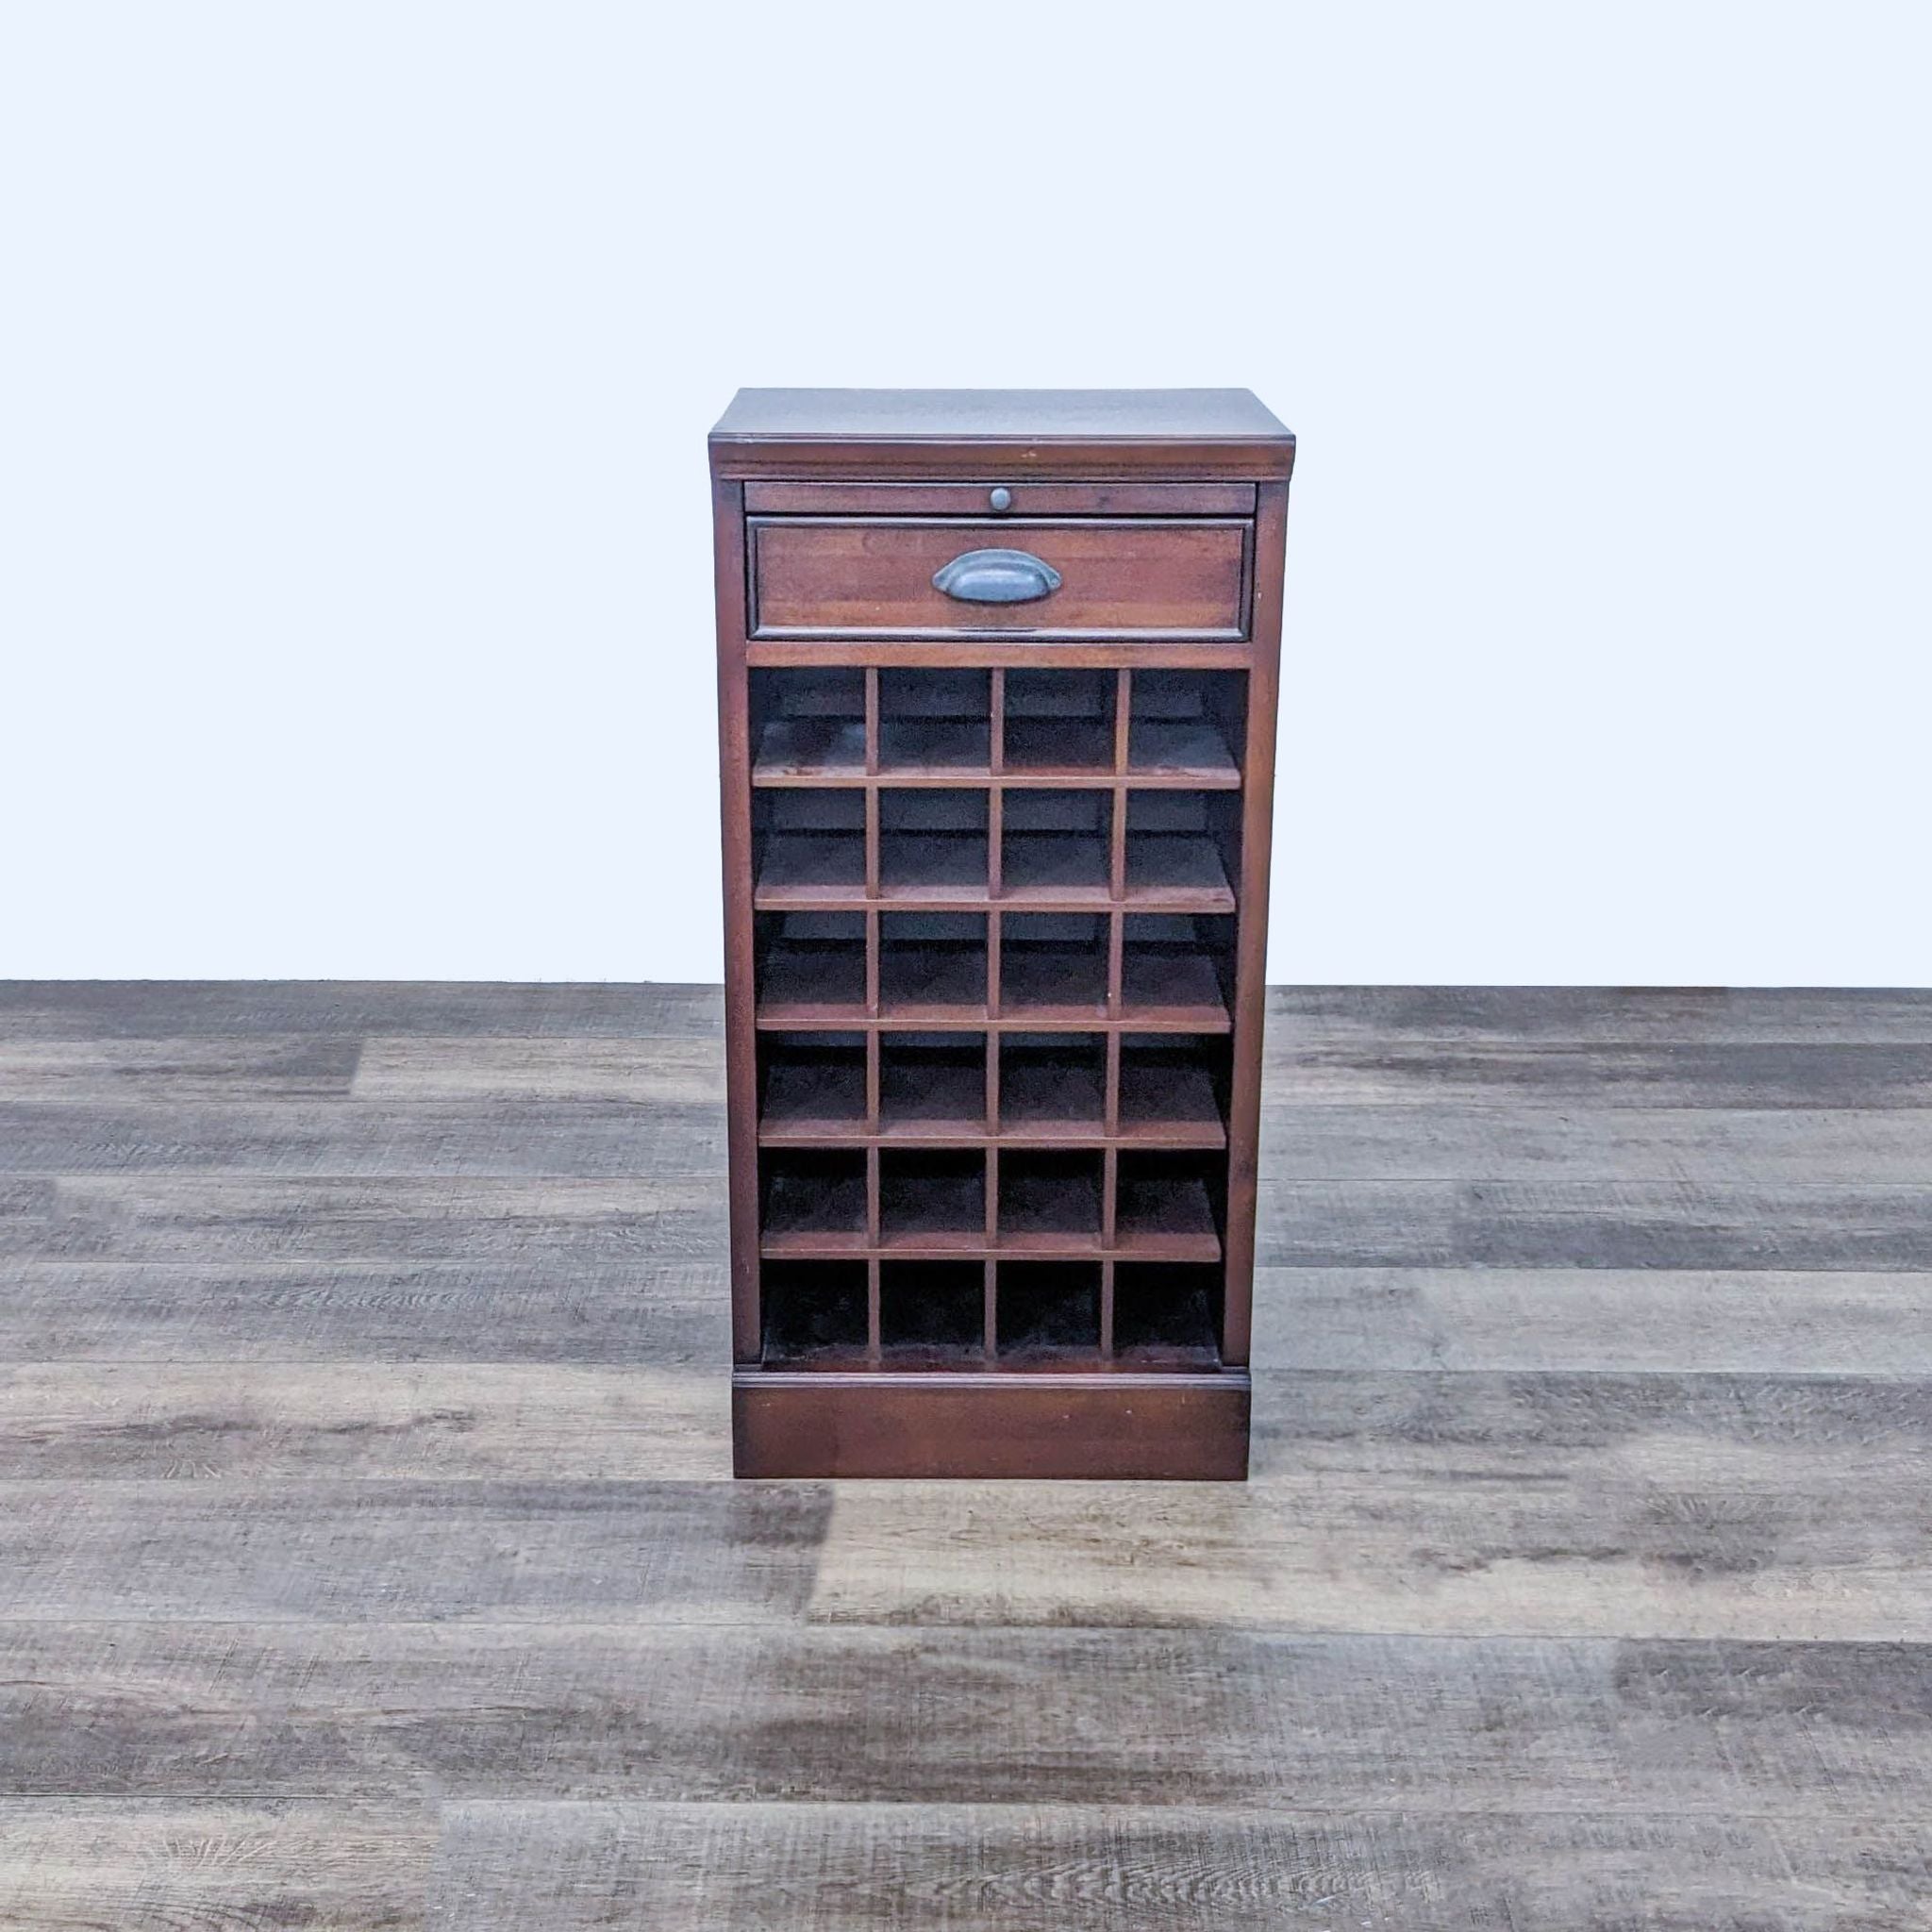 Pottery Barn wooden wine storage with 24 bottle capacity and a top drawer, placed on a wooden floor.